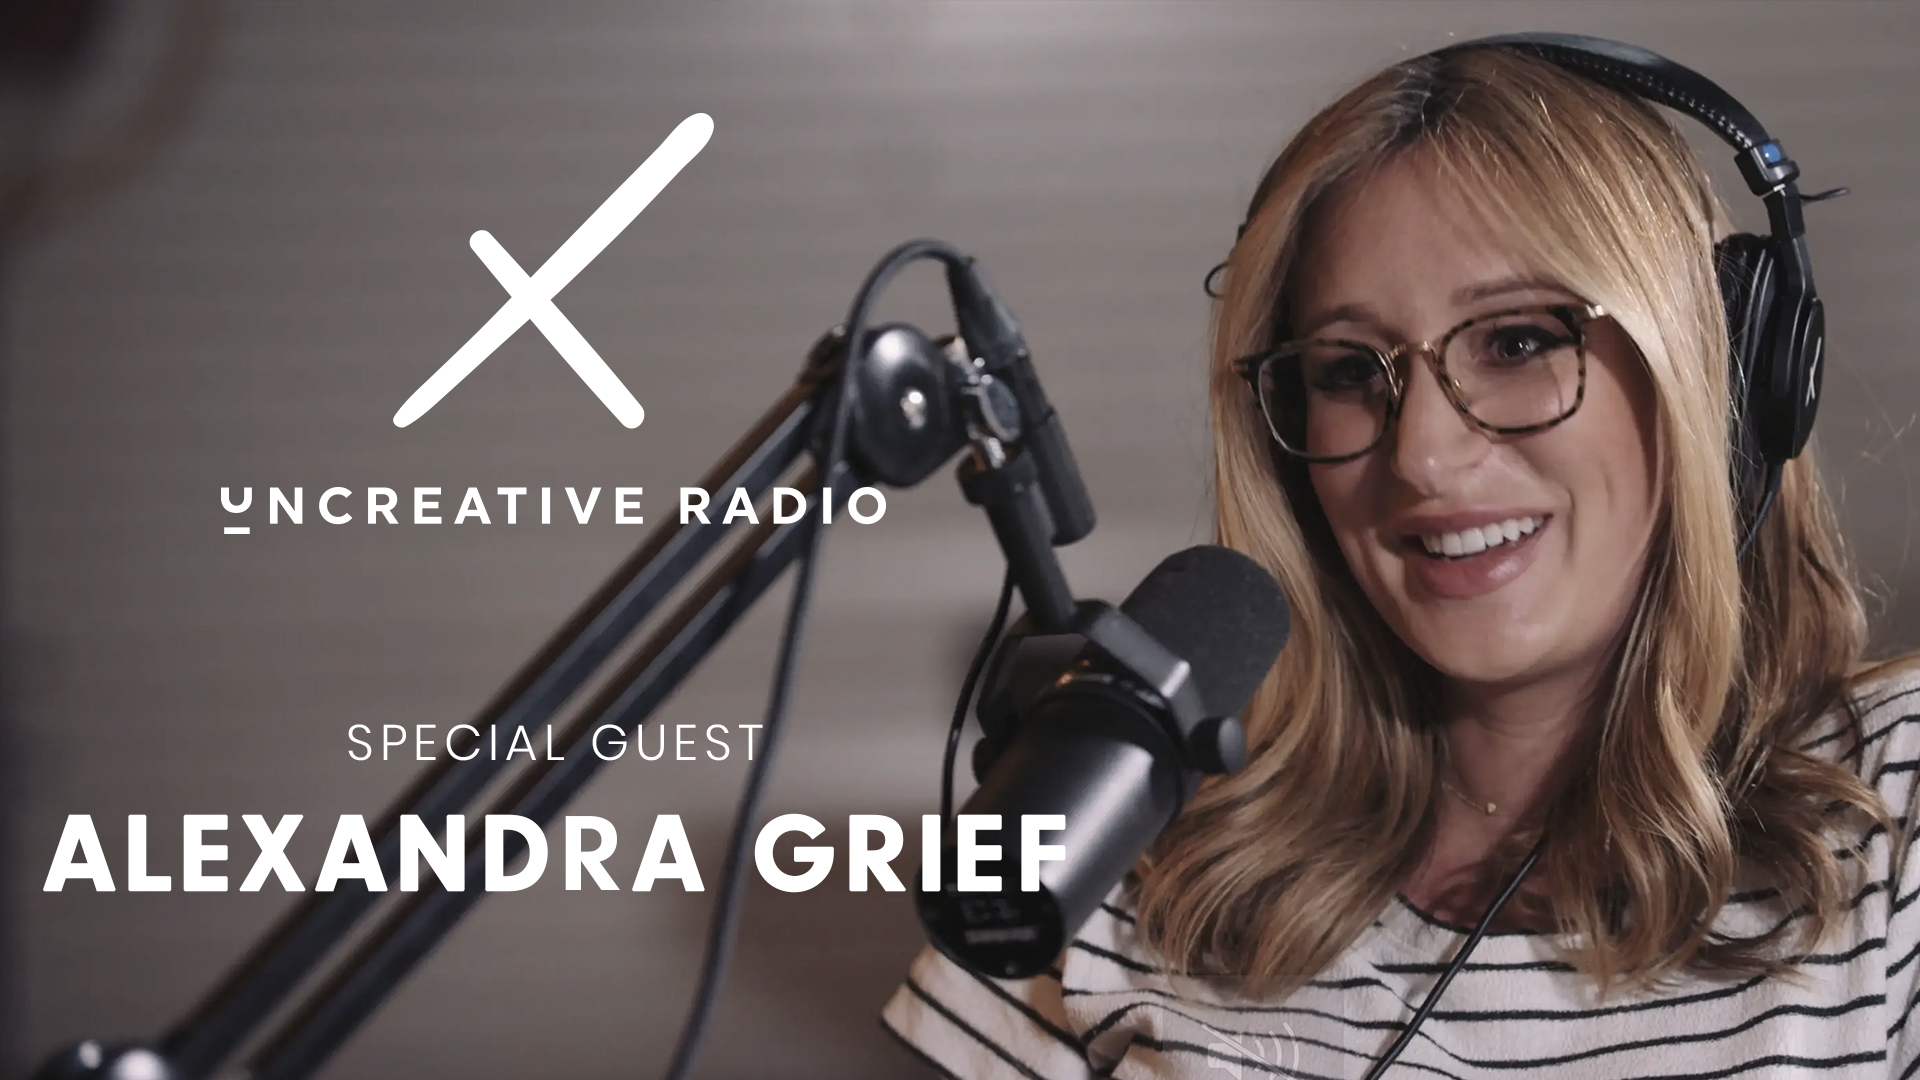 Uncreative Radio with Alexandra Grief title with long blond hair smiling by a microphone wearing black headphones